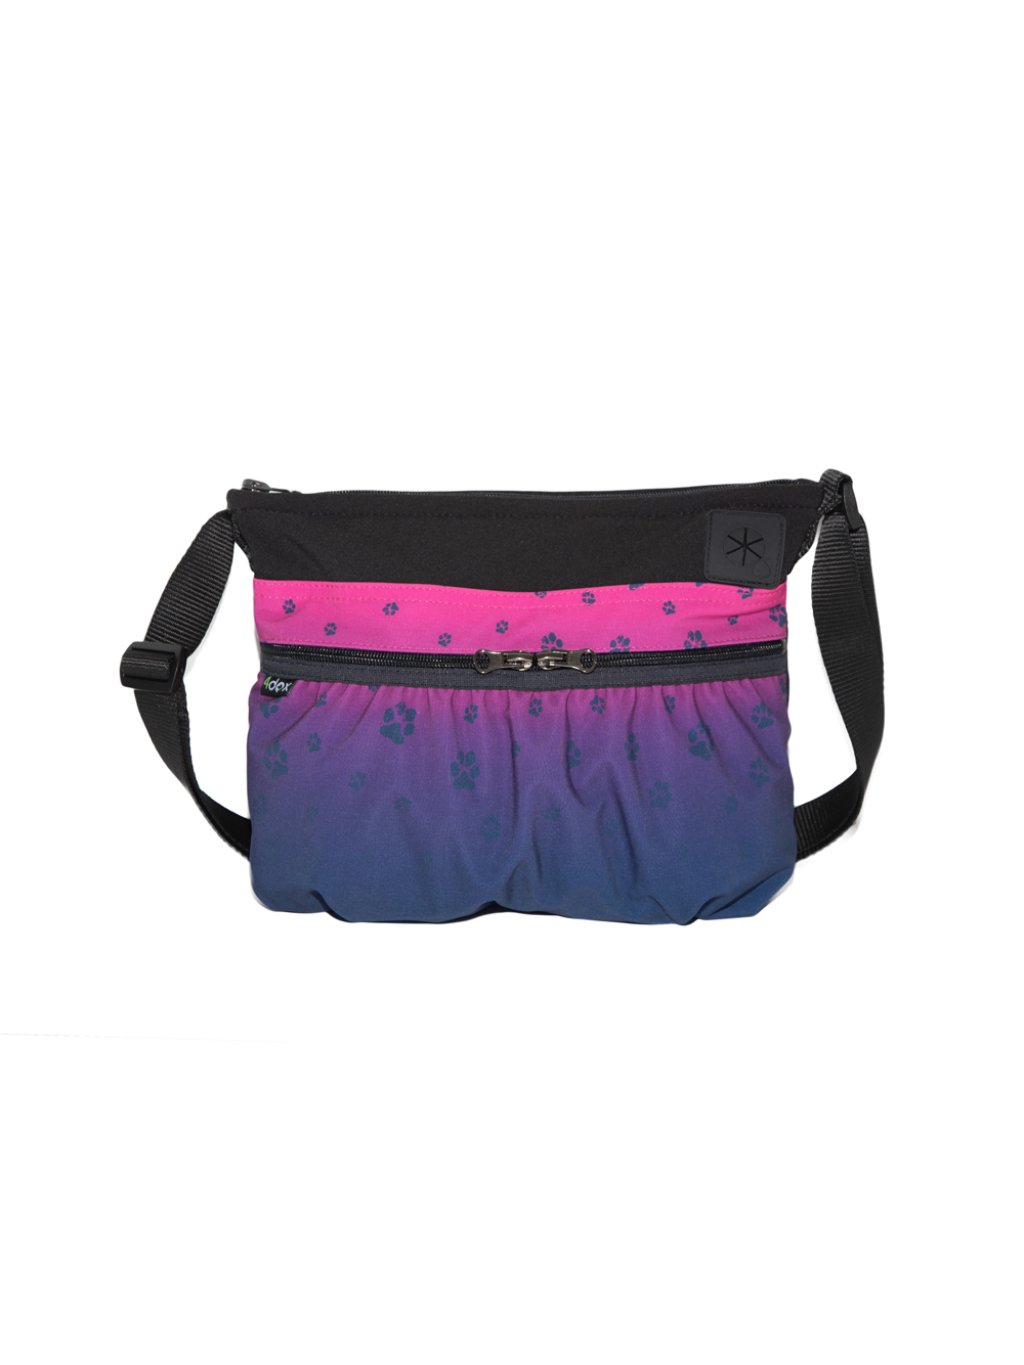 Training bag small OMBRE pink-black No.7 4dox